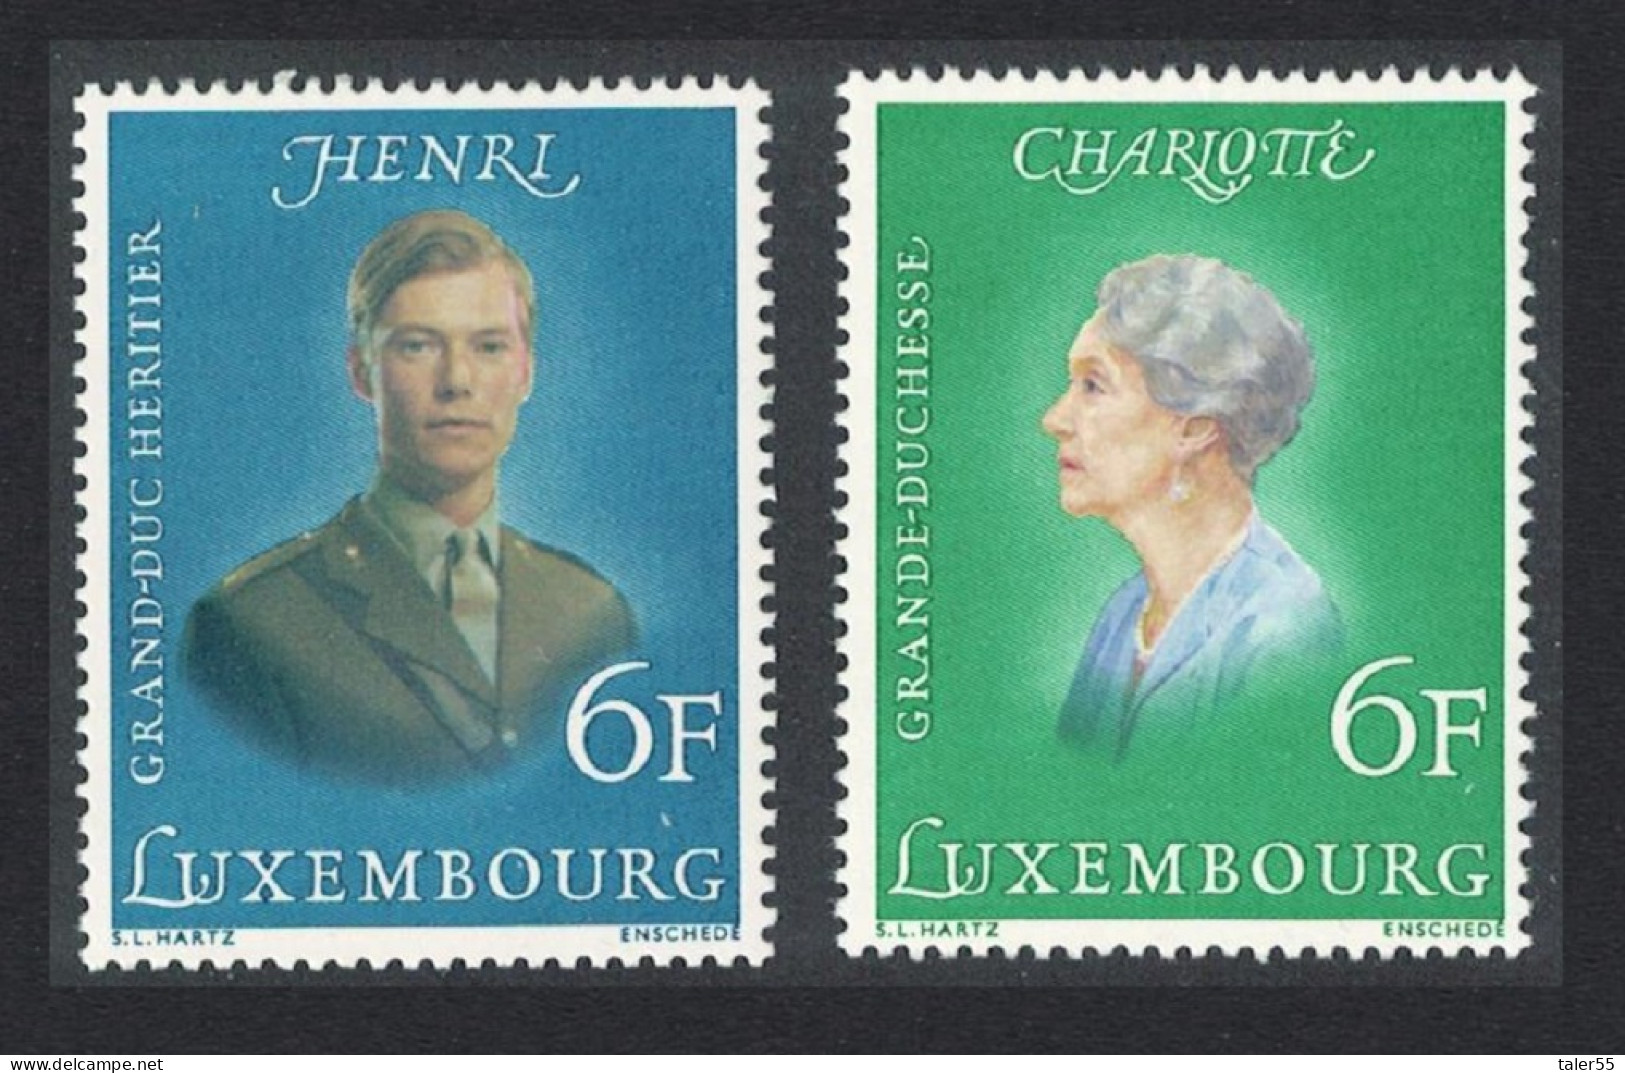 Luxembourg Royal Birthdays 2v 1976 MNH SG#962-963 Sc#579-580 - Unused Stamps